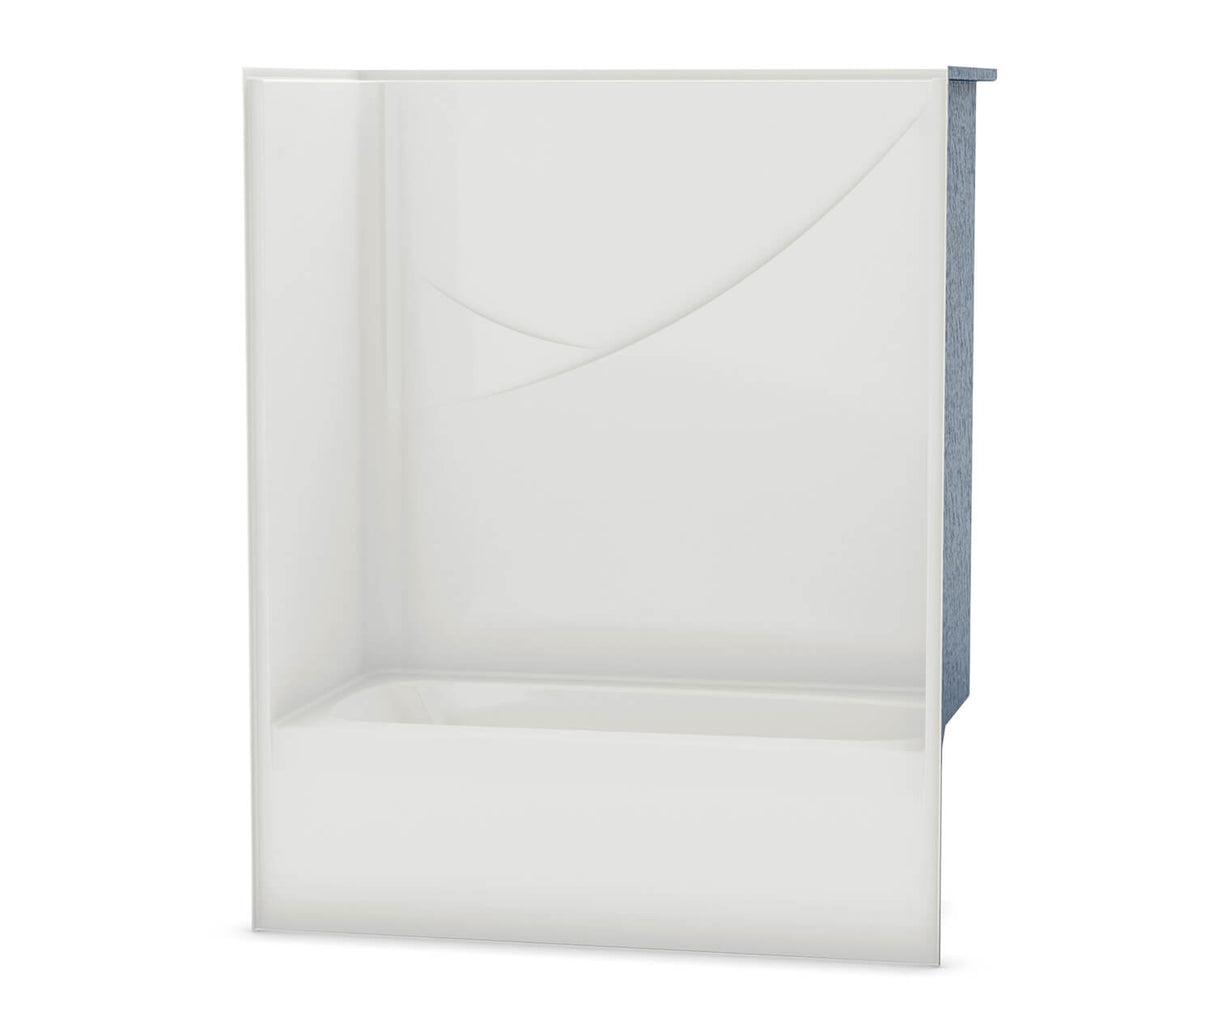 MAAX 106057-000-002-001 OPTS-6032 - Base Model AcrylX Alcove Left-Hand Drain One-Piece Tub Shower in White